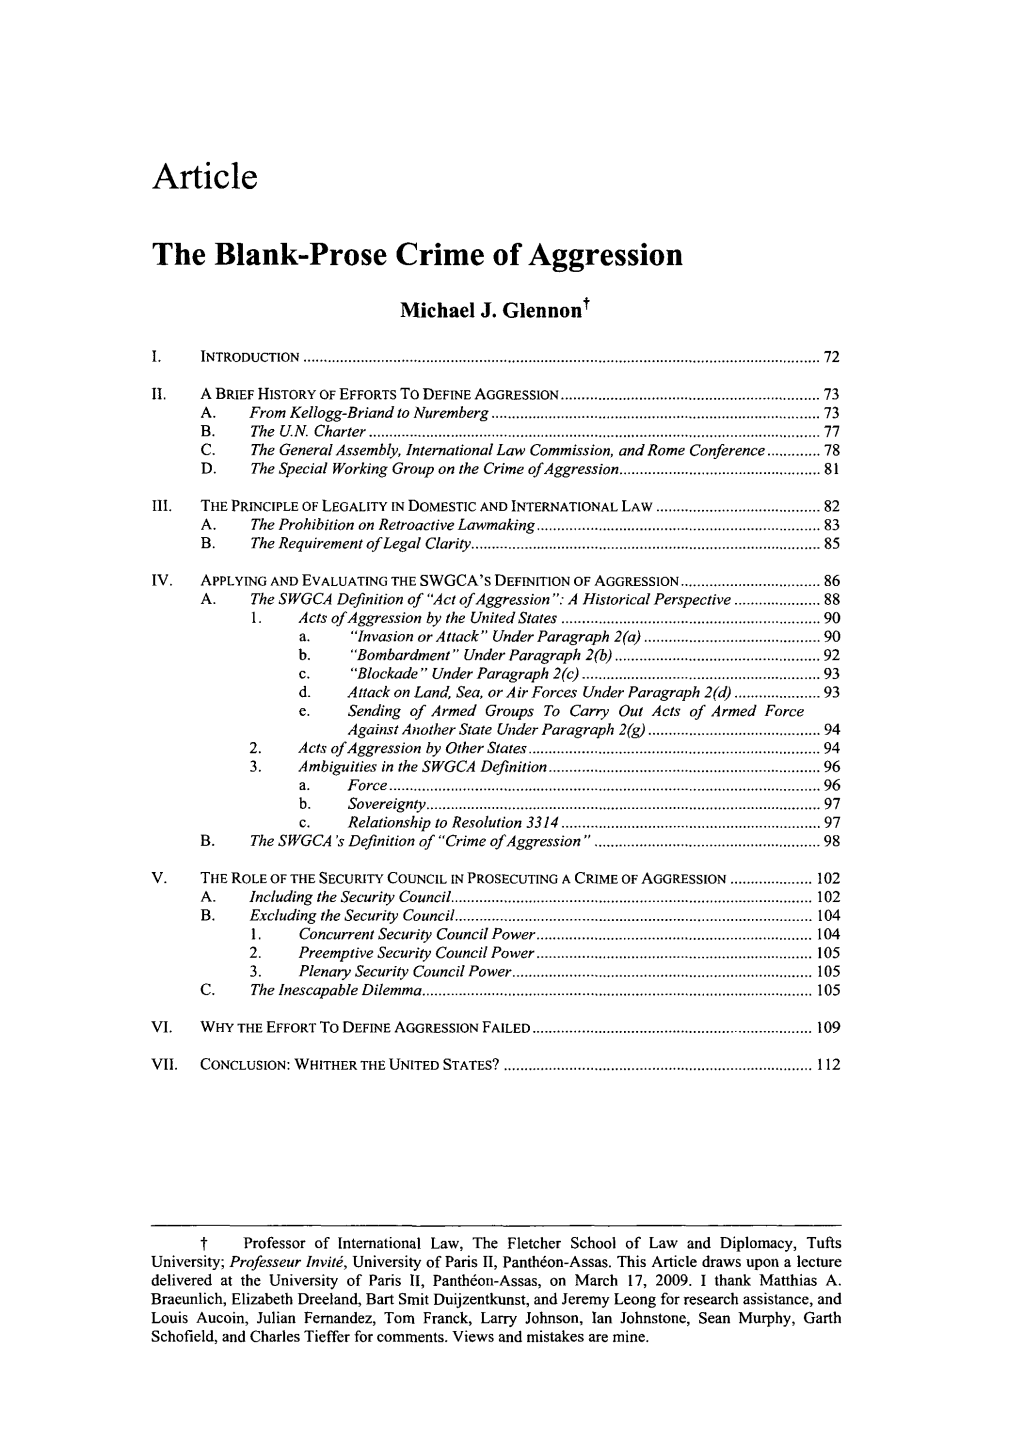 The Blank-Prose Crime of Aggression